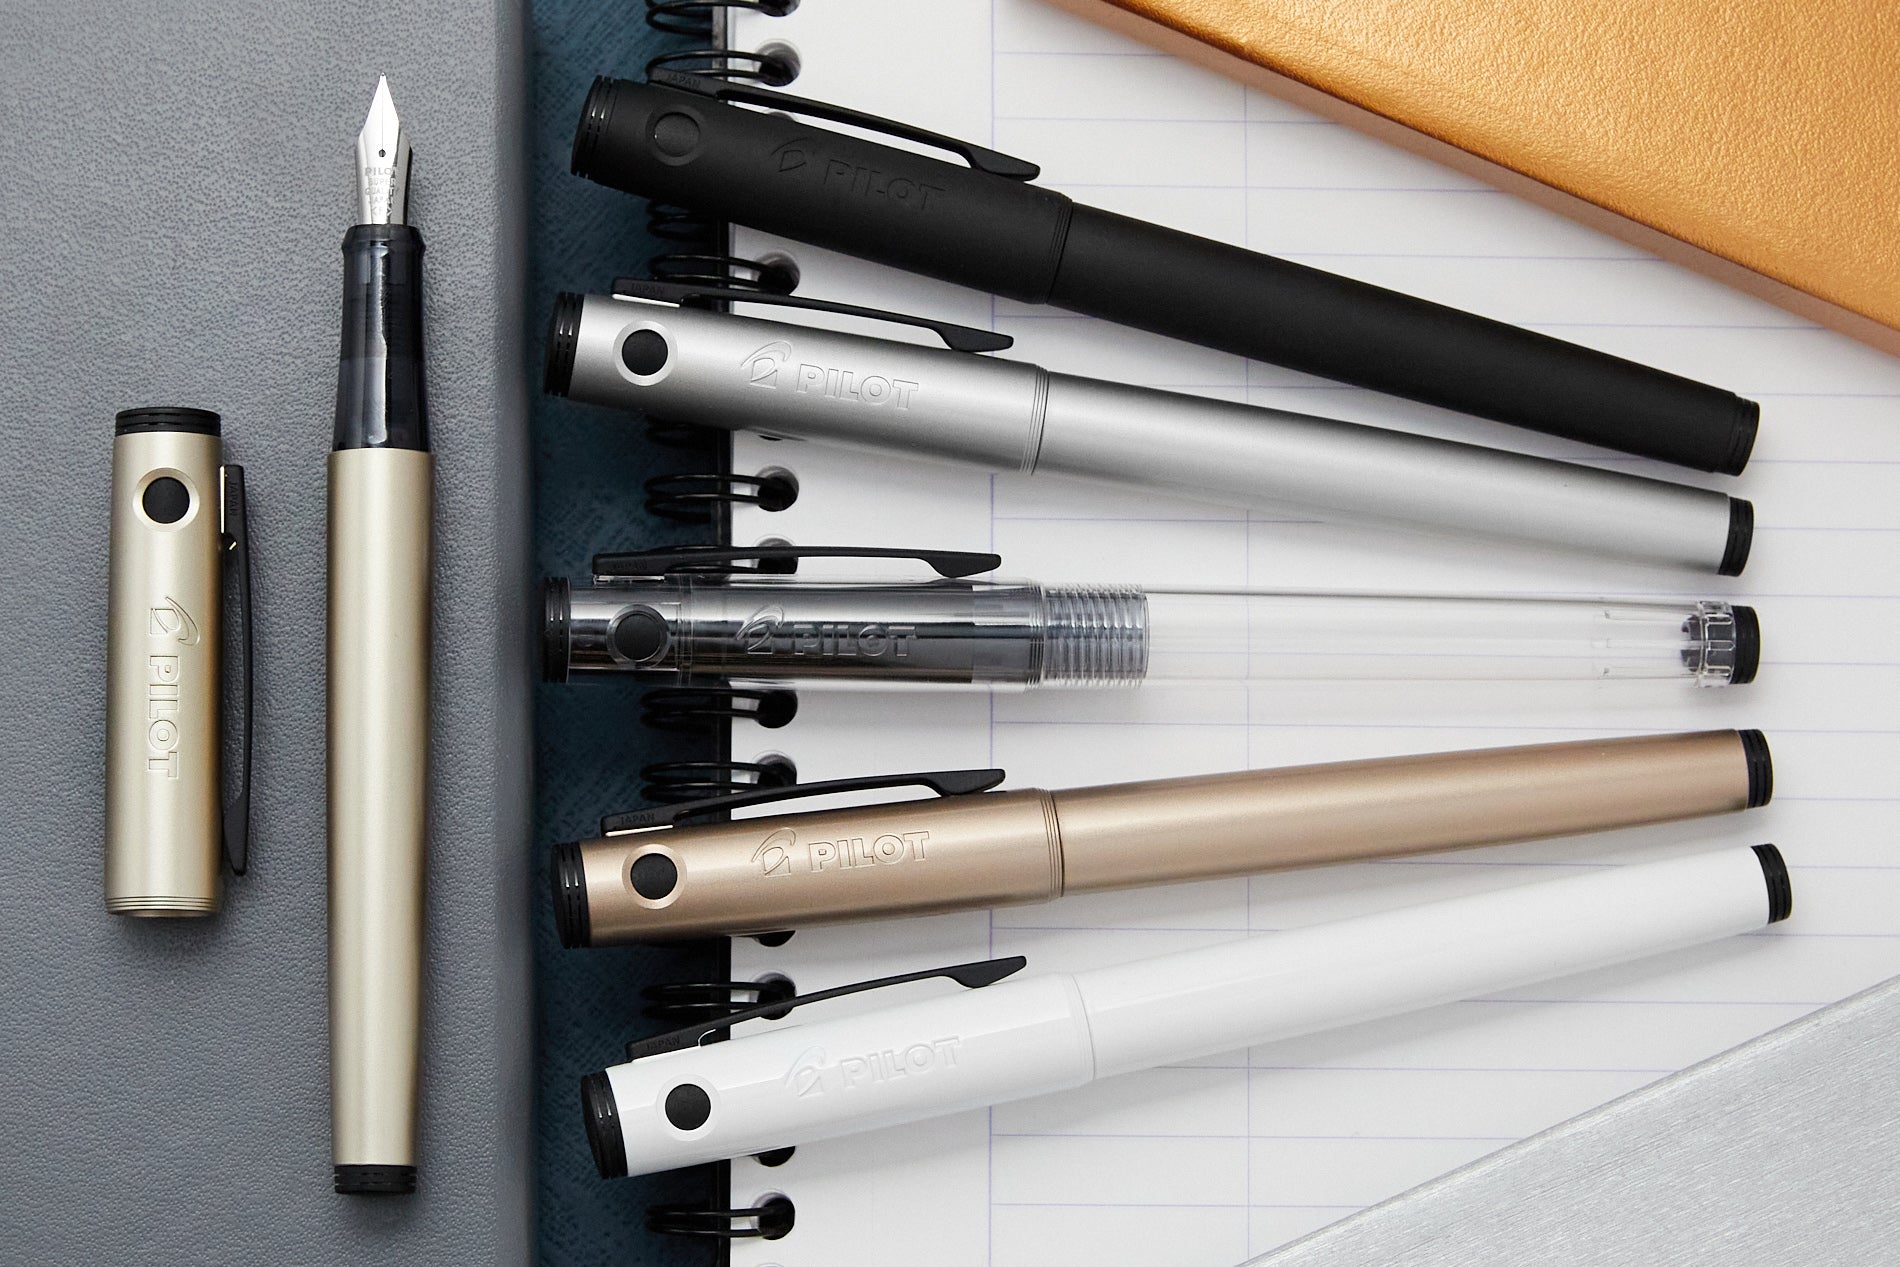 Assorted Pilot Explorer fountain pens in Gold, copper, silver, matte black, clear ad white finishes on a white and gray background